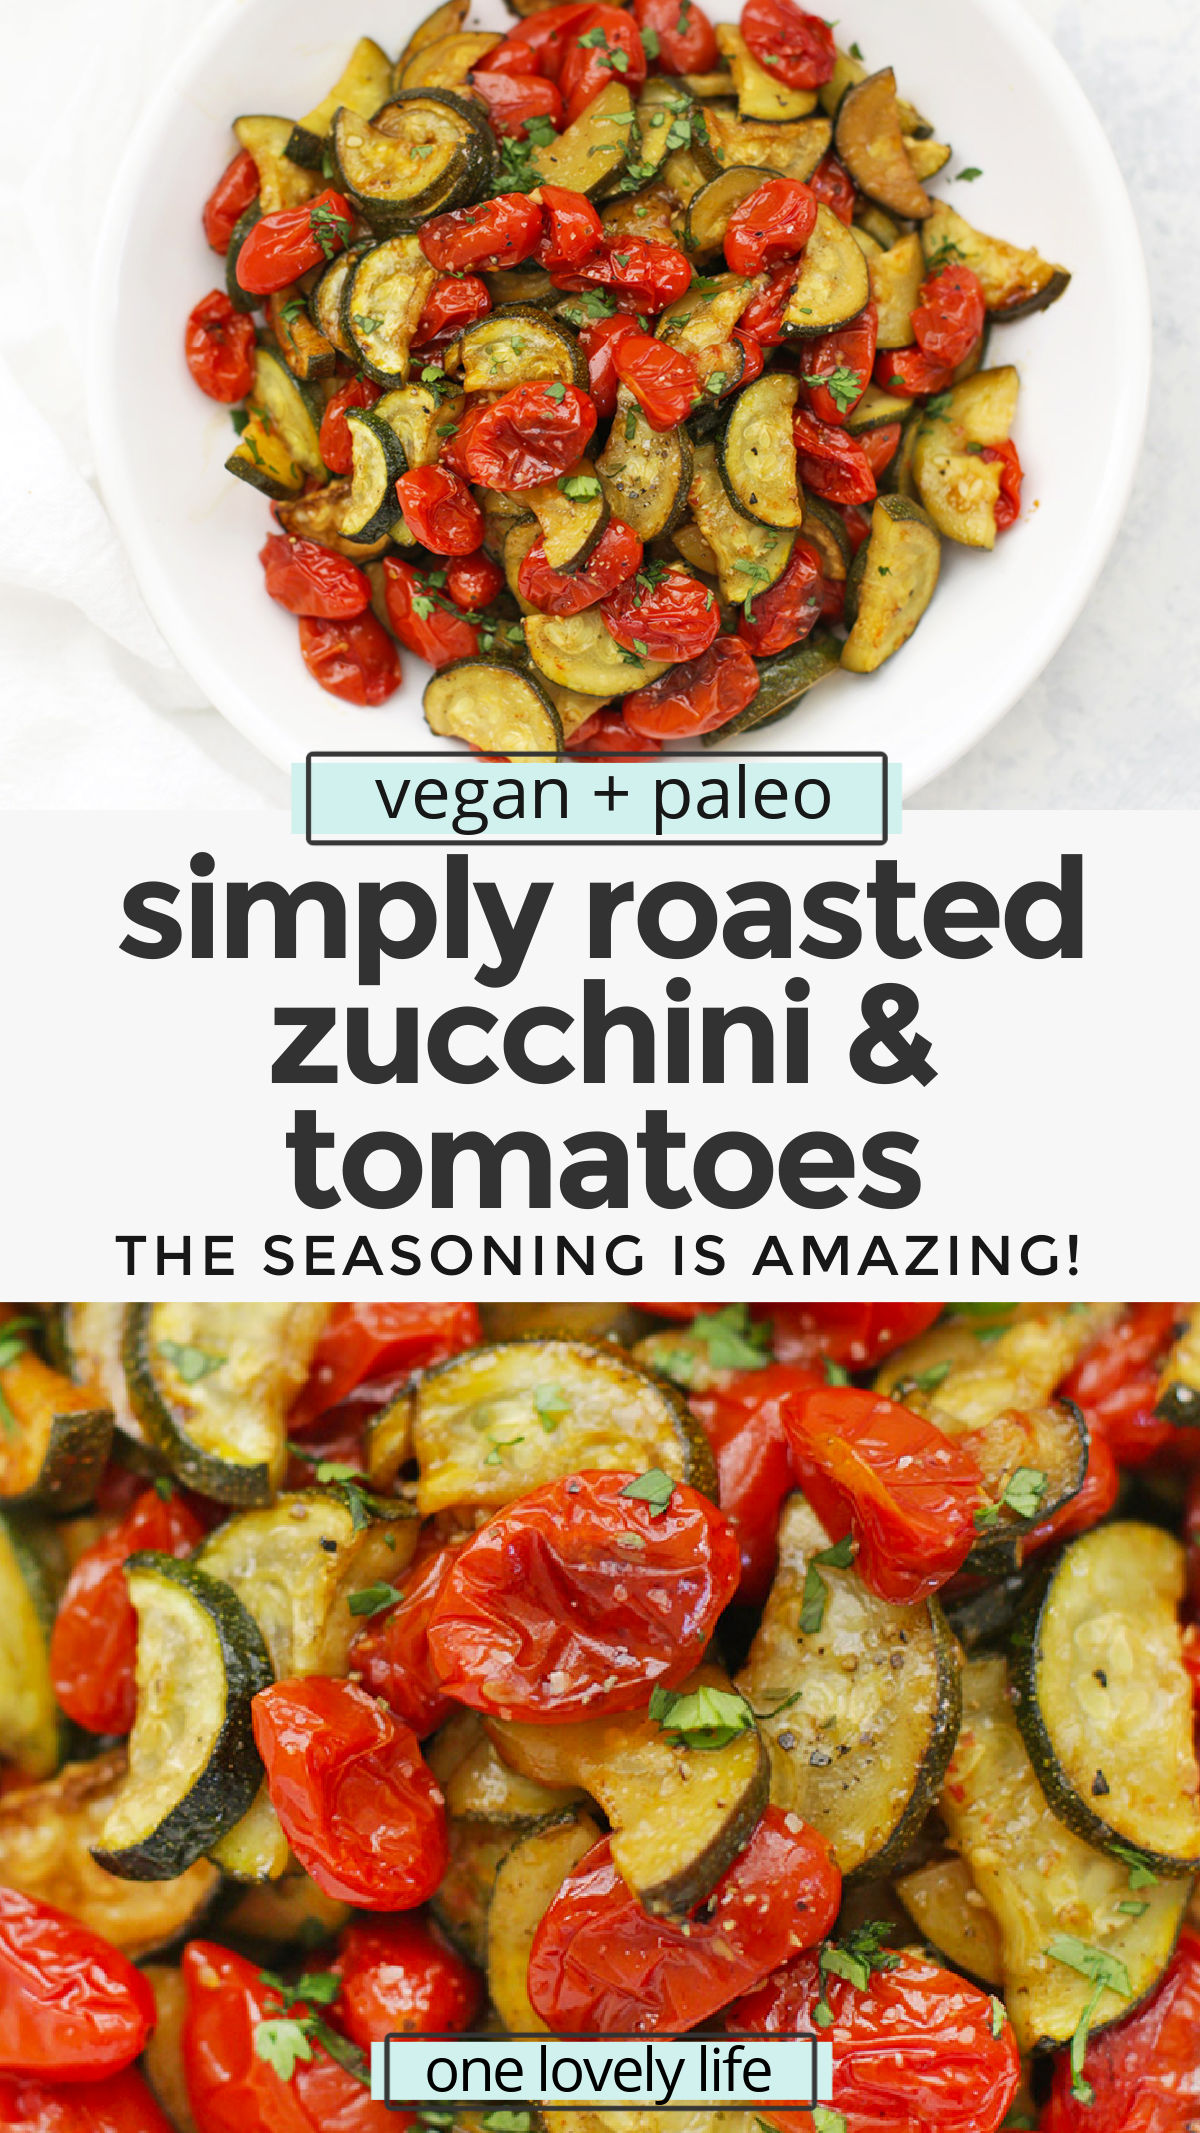 Simply Roasted Zucchini and Tomatoes. The perfect vegetable side dish! Gluten free, dairy free, paleo, whole30, and vegan! // zucchini recipe // tomato recipe // roasted zucchini // roasted tomatoes // roasted veggies // roasted vegetables //